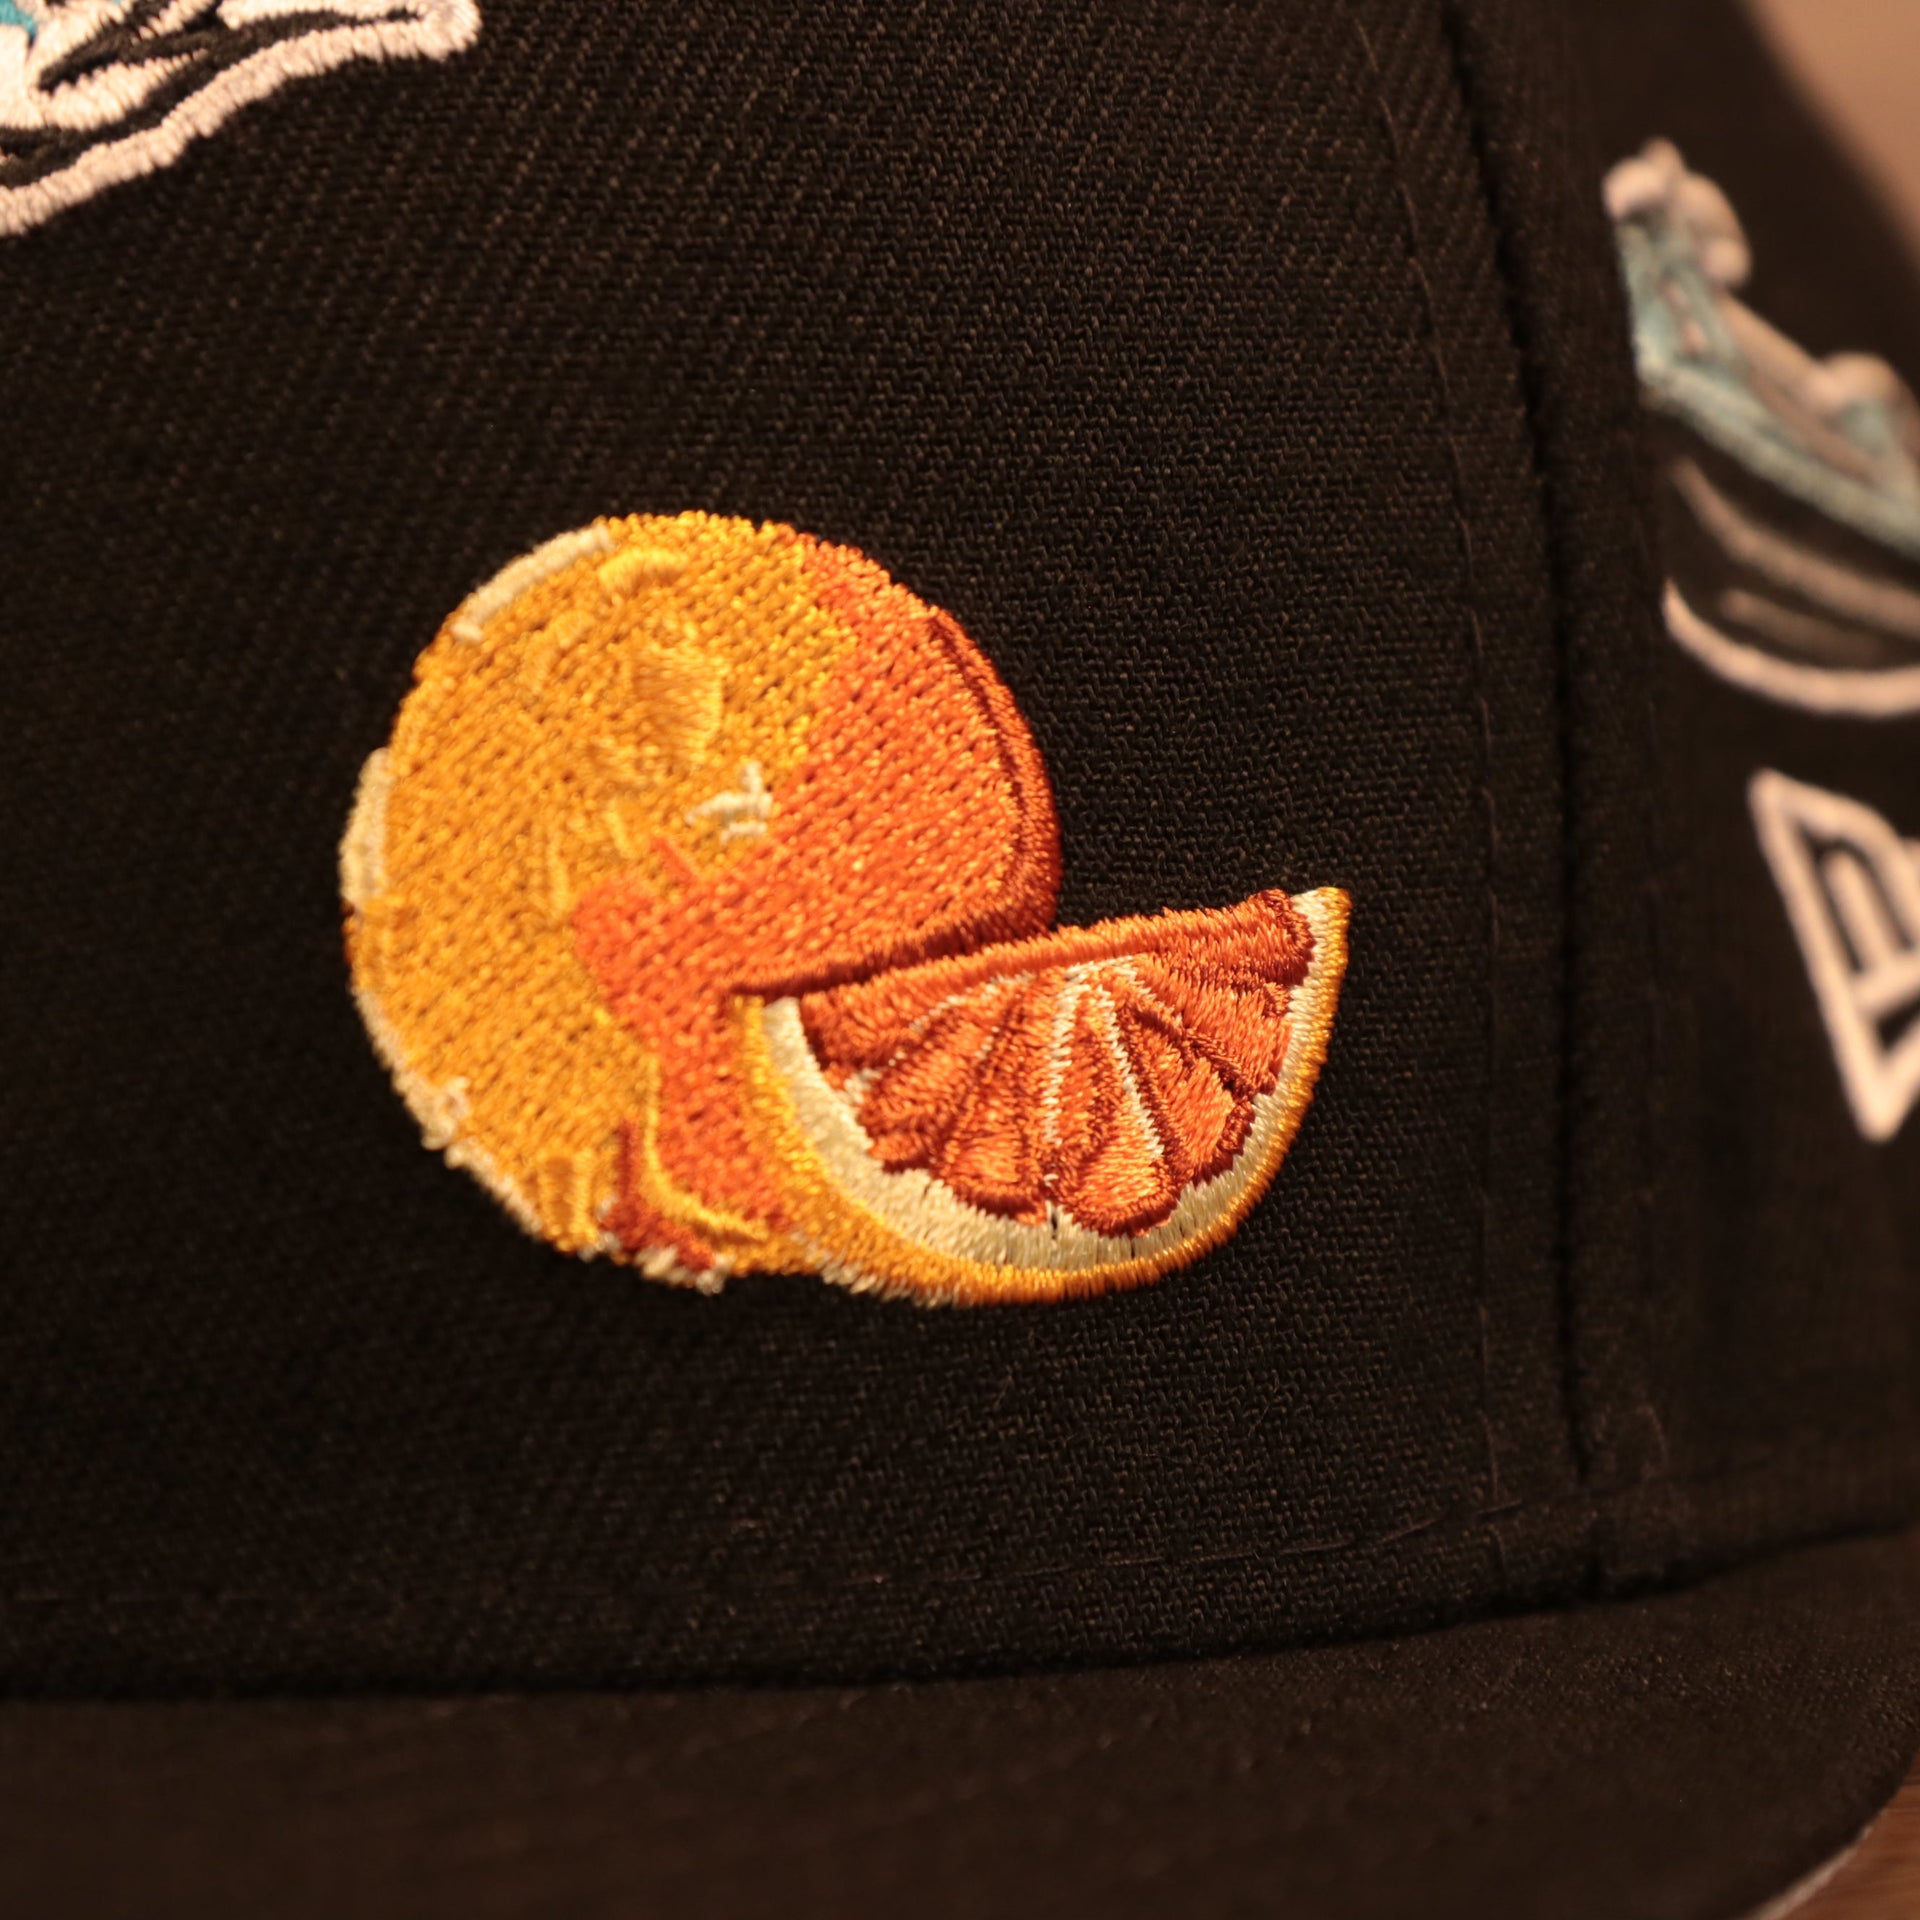 Close up of the orange patch logo on the Florida Marlins Cooperstown City Transit All Over Side Patch Gray Bottom 59Fifty Fitted Cap